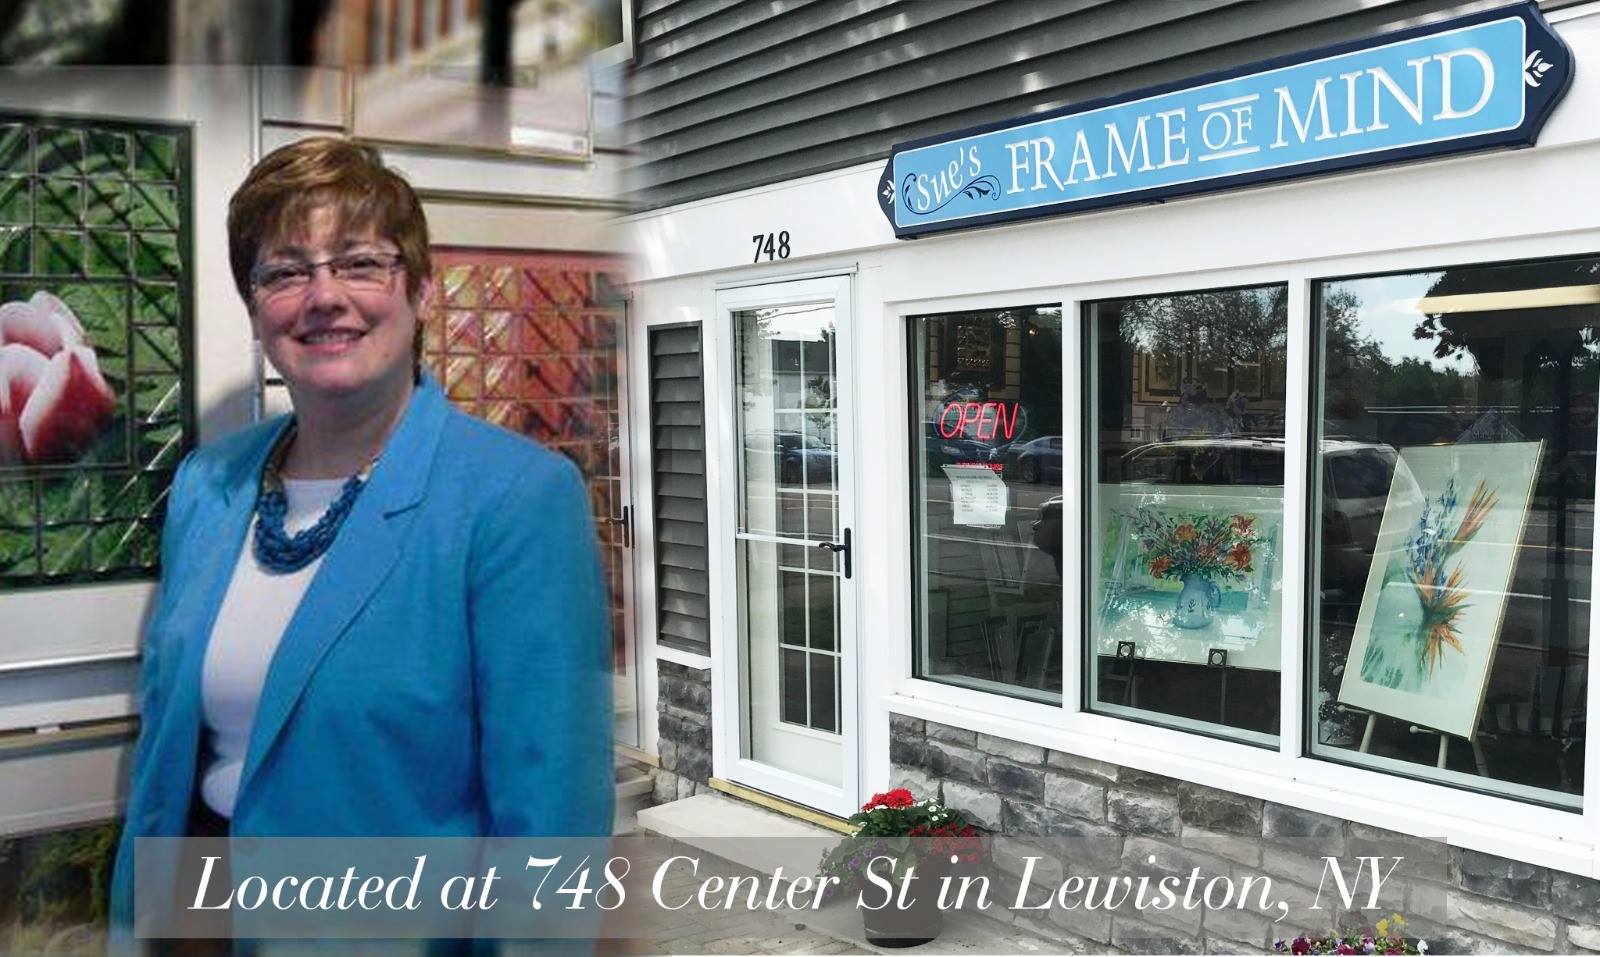 Sue’s Frame of Mind owner in front of store location